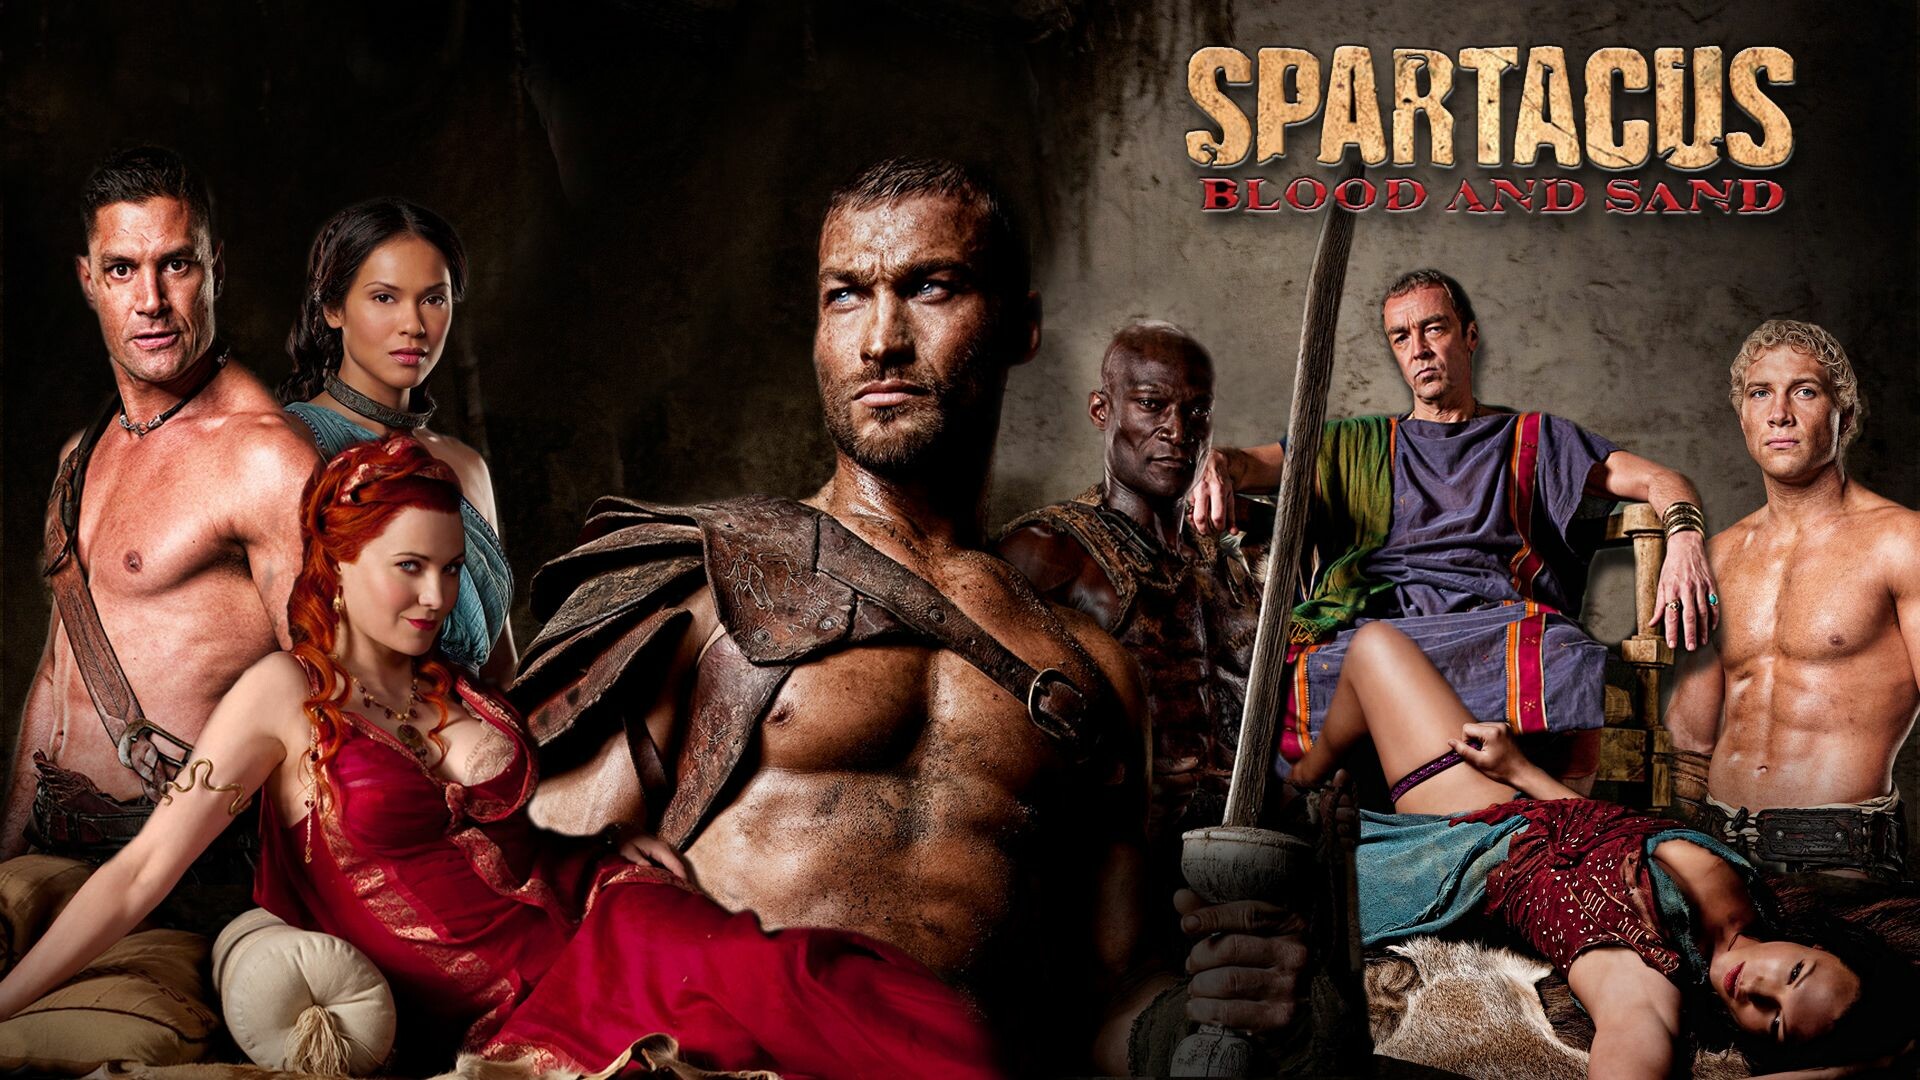 Spartacus: Blood and Sand: An American historical drama television franchise created by Steven S. DeKnight. 1920x1080 Full HD Wallpaper.